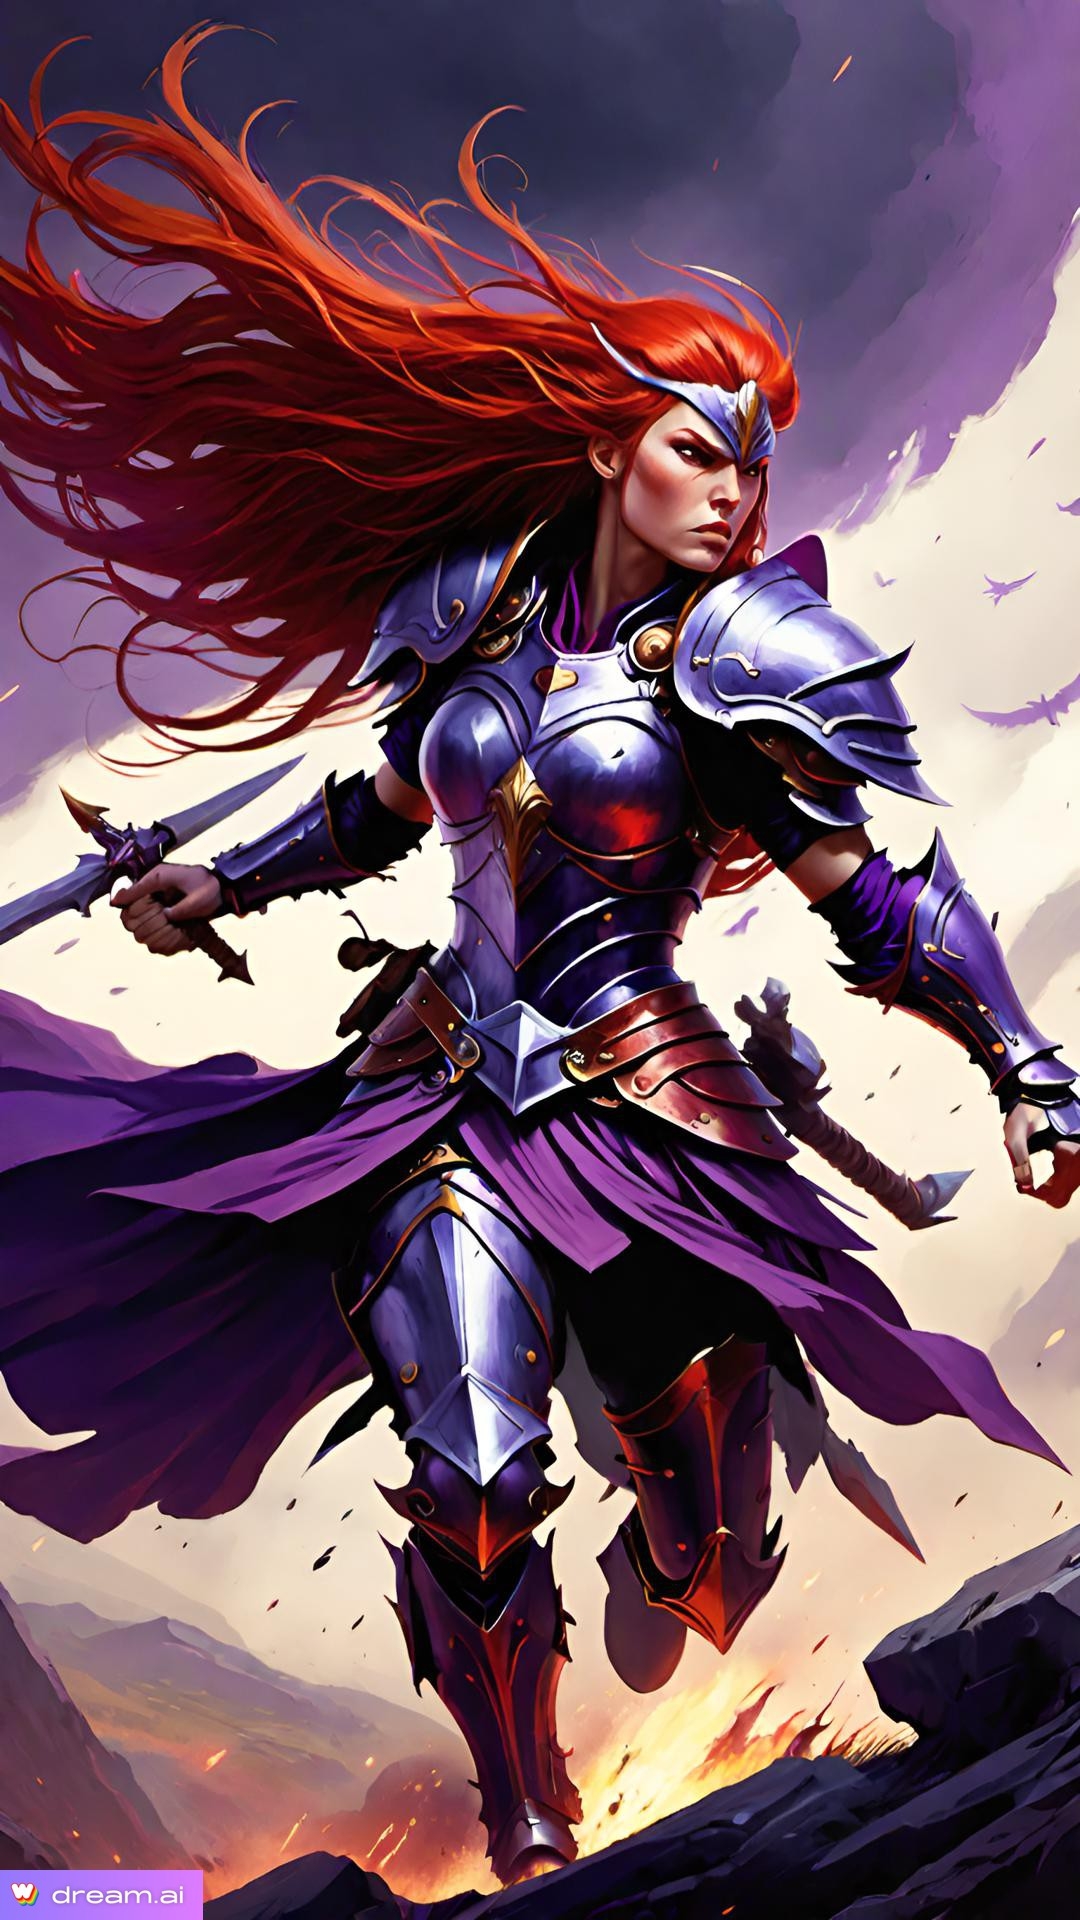 a woman in armor with long red hair holding a sword